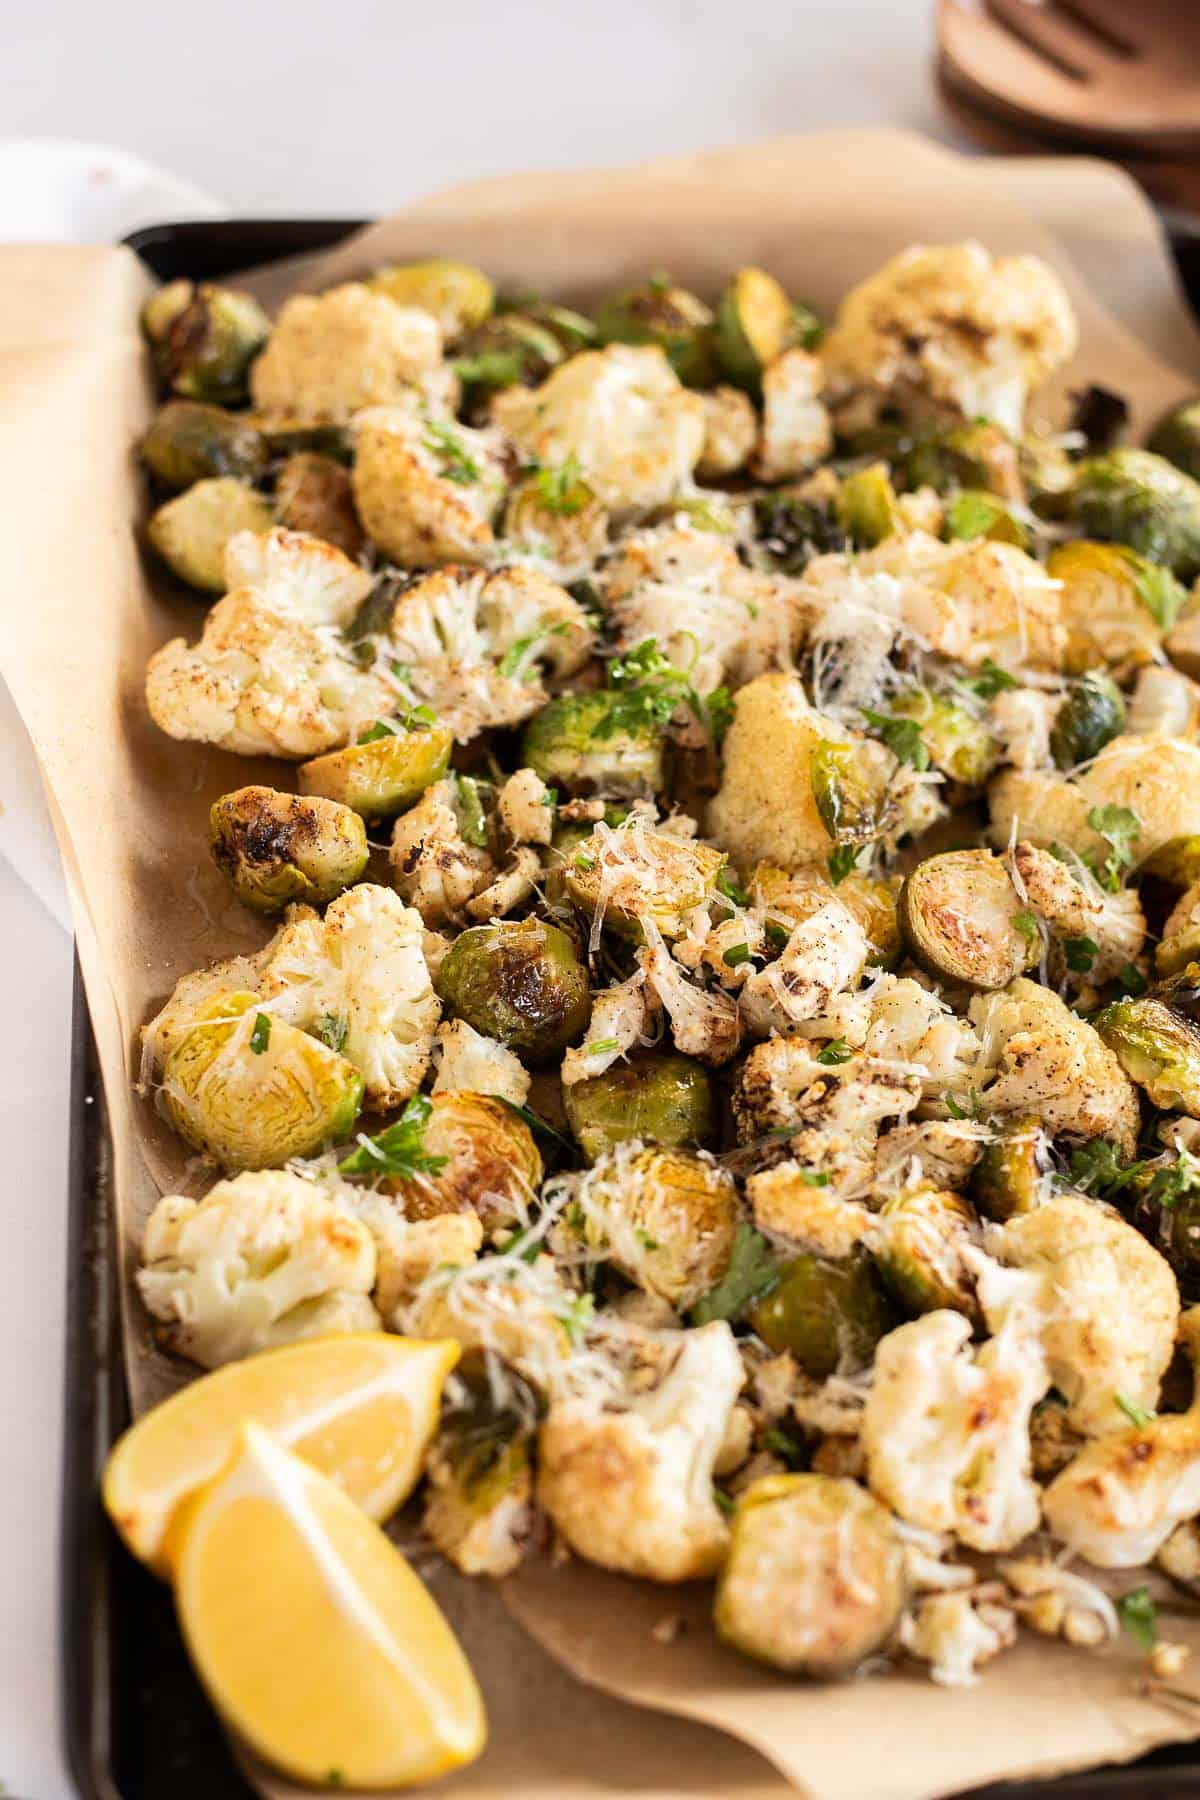 Roasted Cauliflower & Brussels Sprouts with Parmesan cheese on a parchment lined baking sheet.